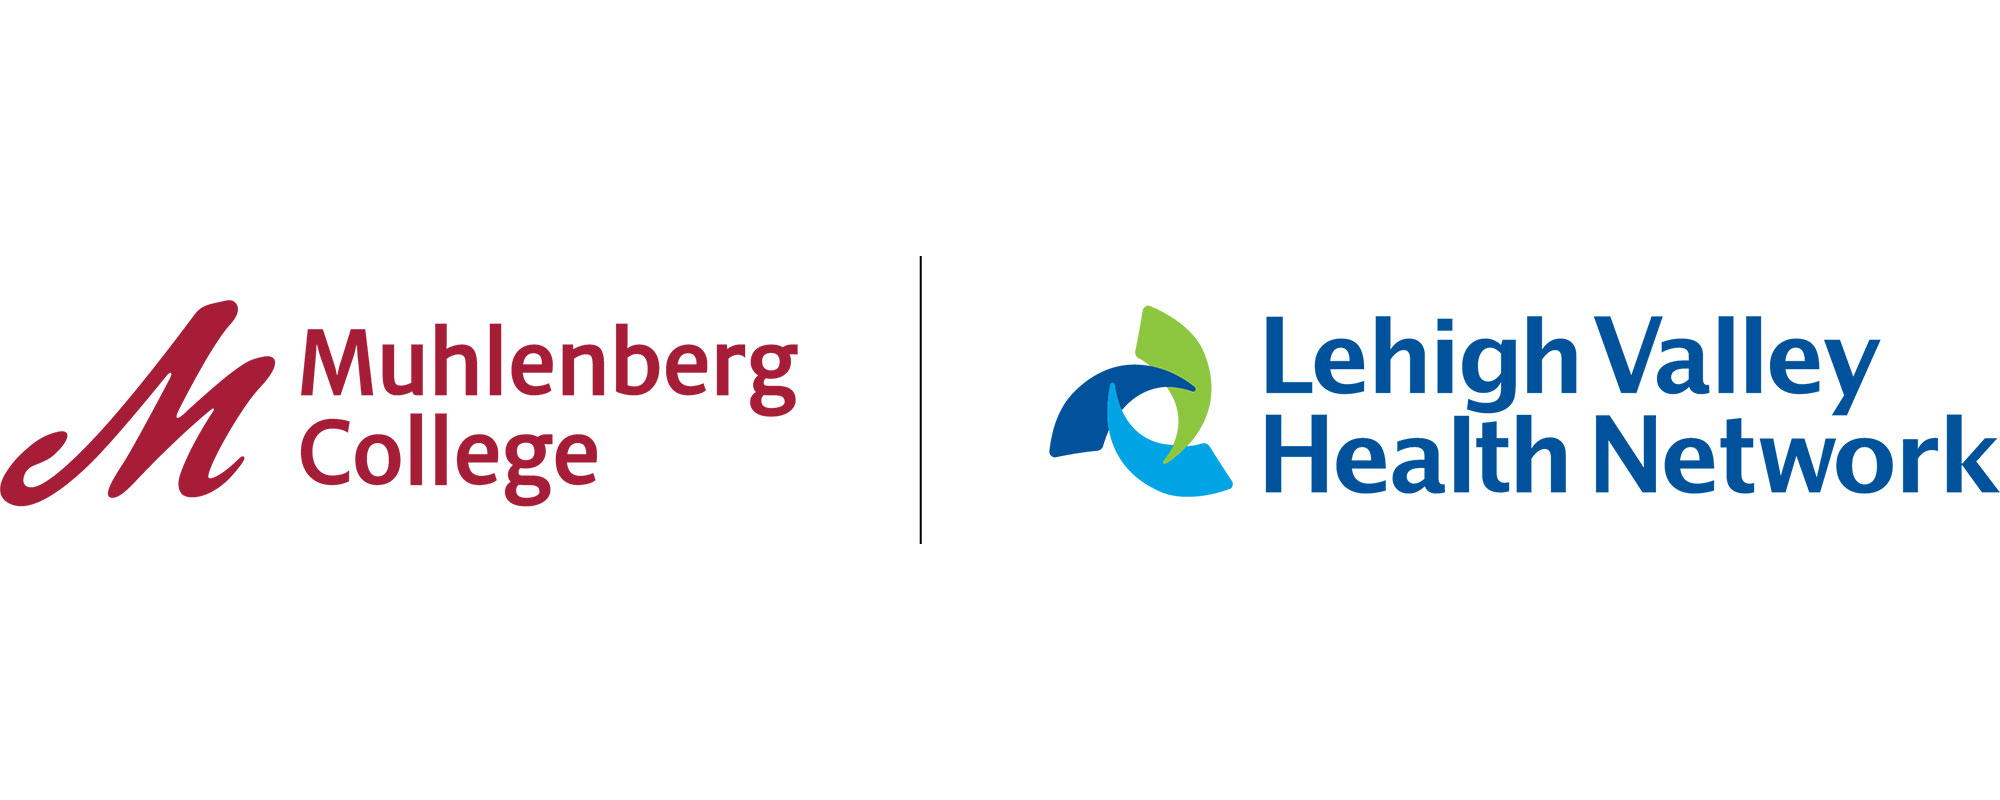 A side-by-side graphic that features the logo for Muhlenberg College and the Lehigh Valley Health Network